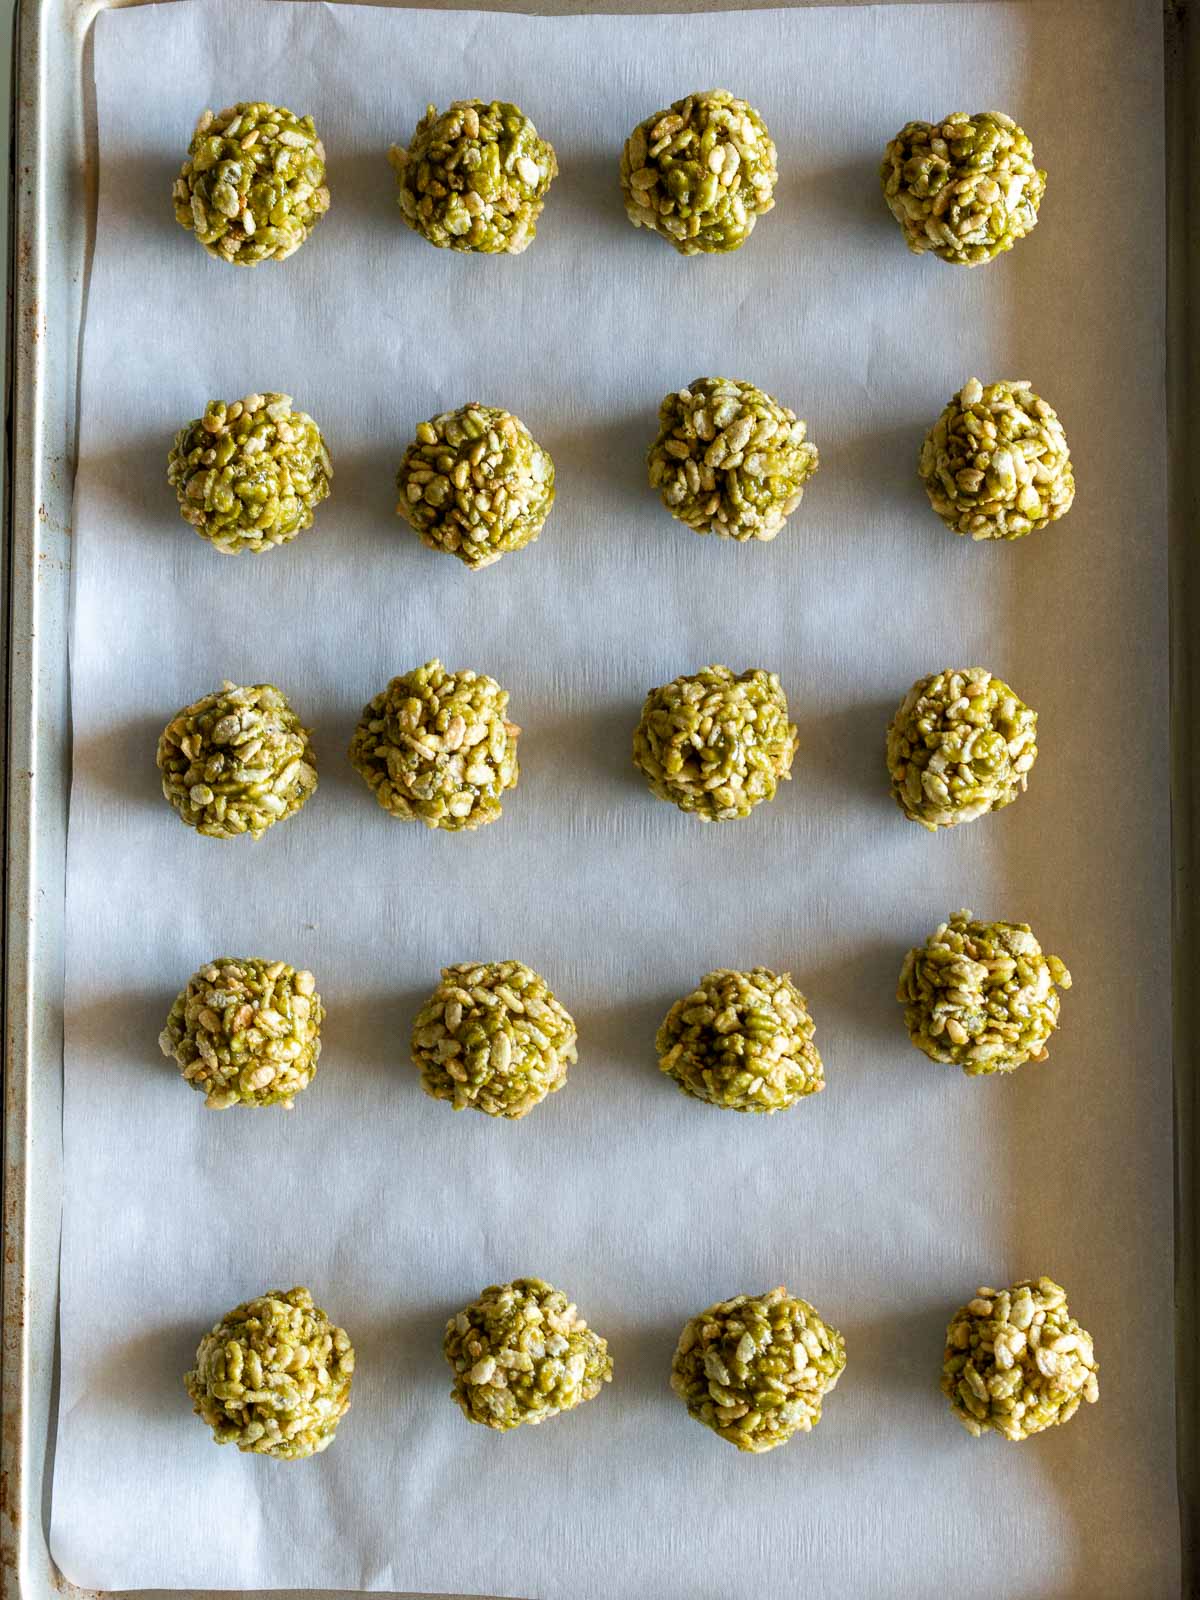 Rolled matcha crispy rice cereal ball treats laid out on a baking sheet.